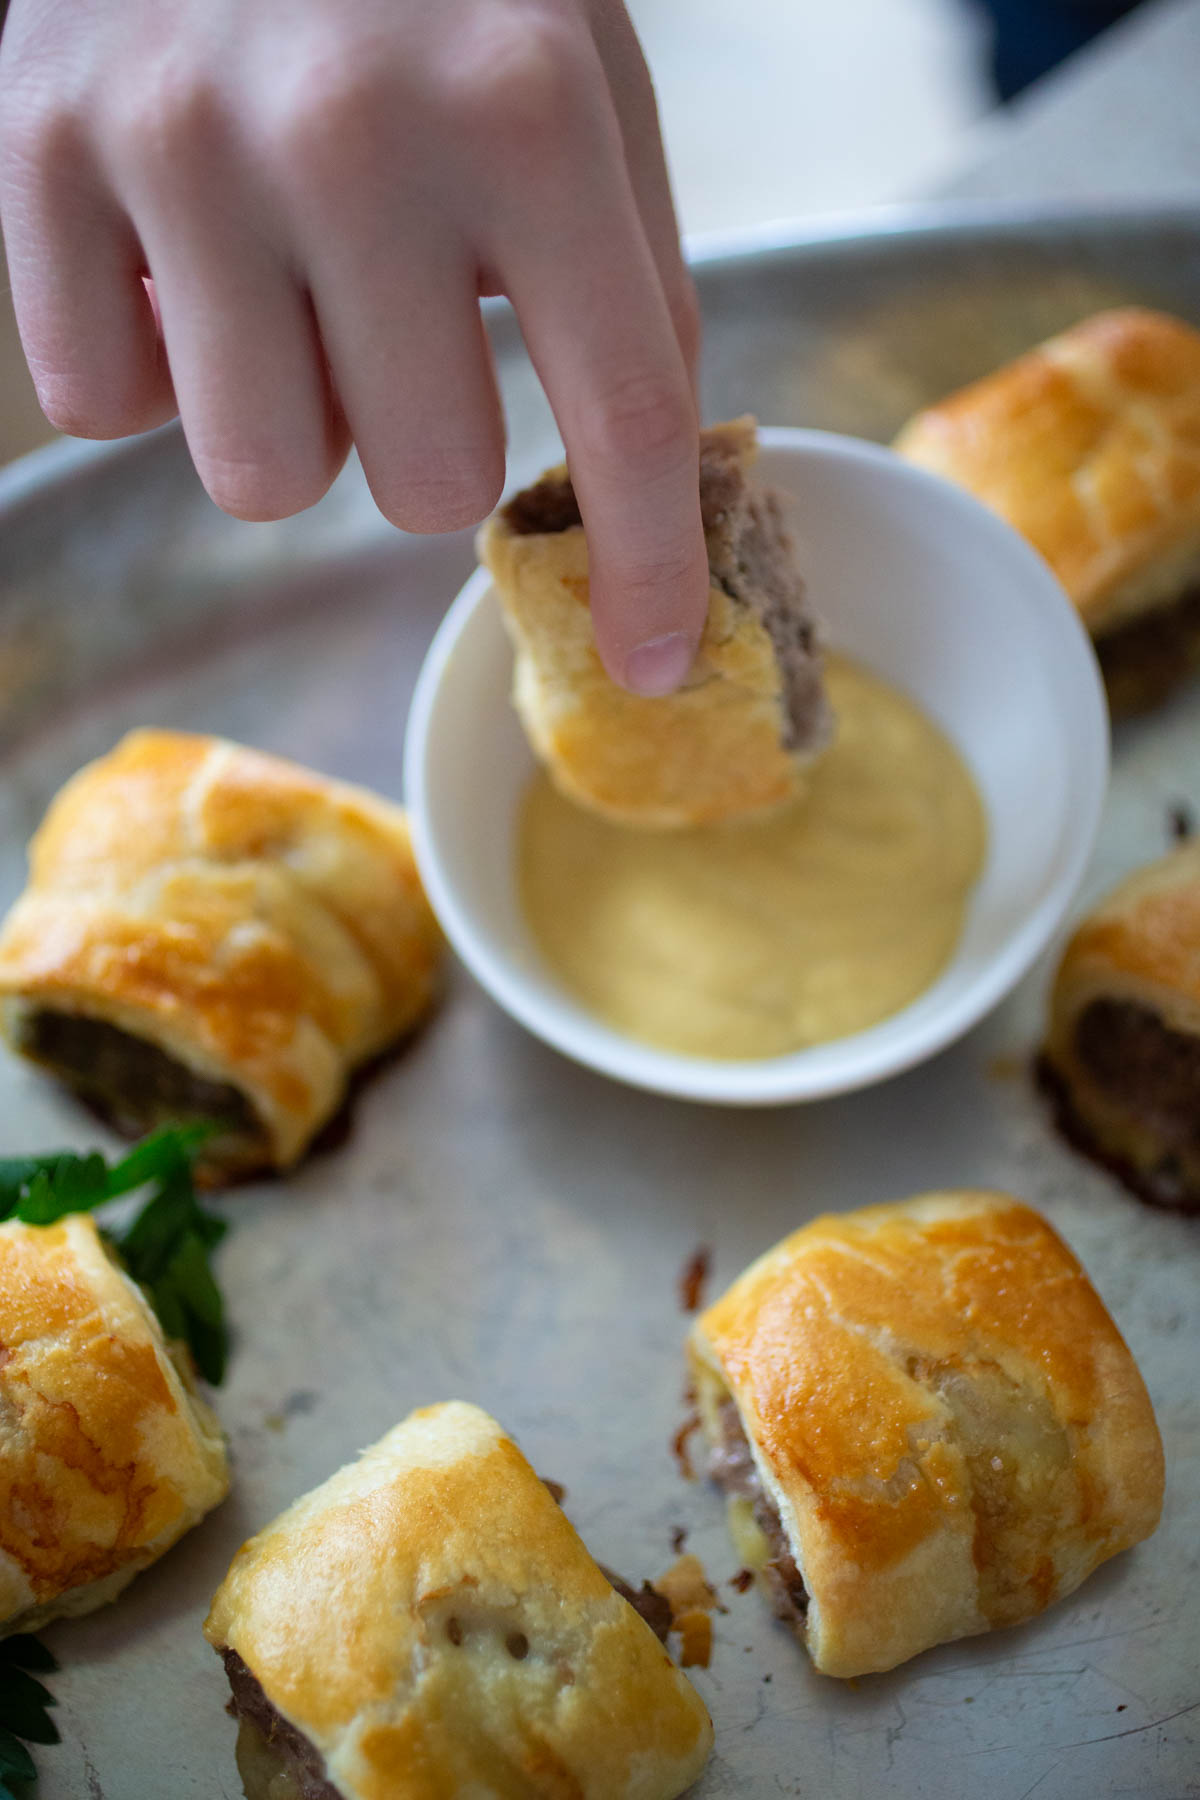 A hand is dipping one of the sausage rolls into a bowl of mustard.